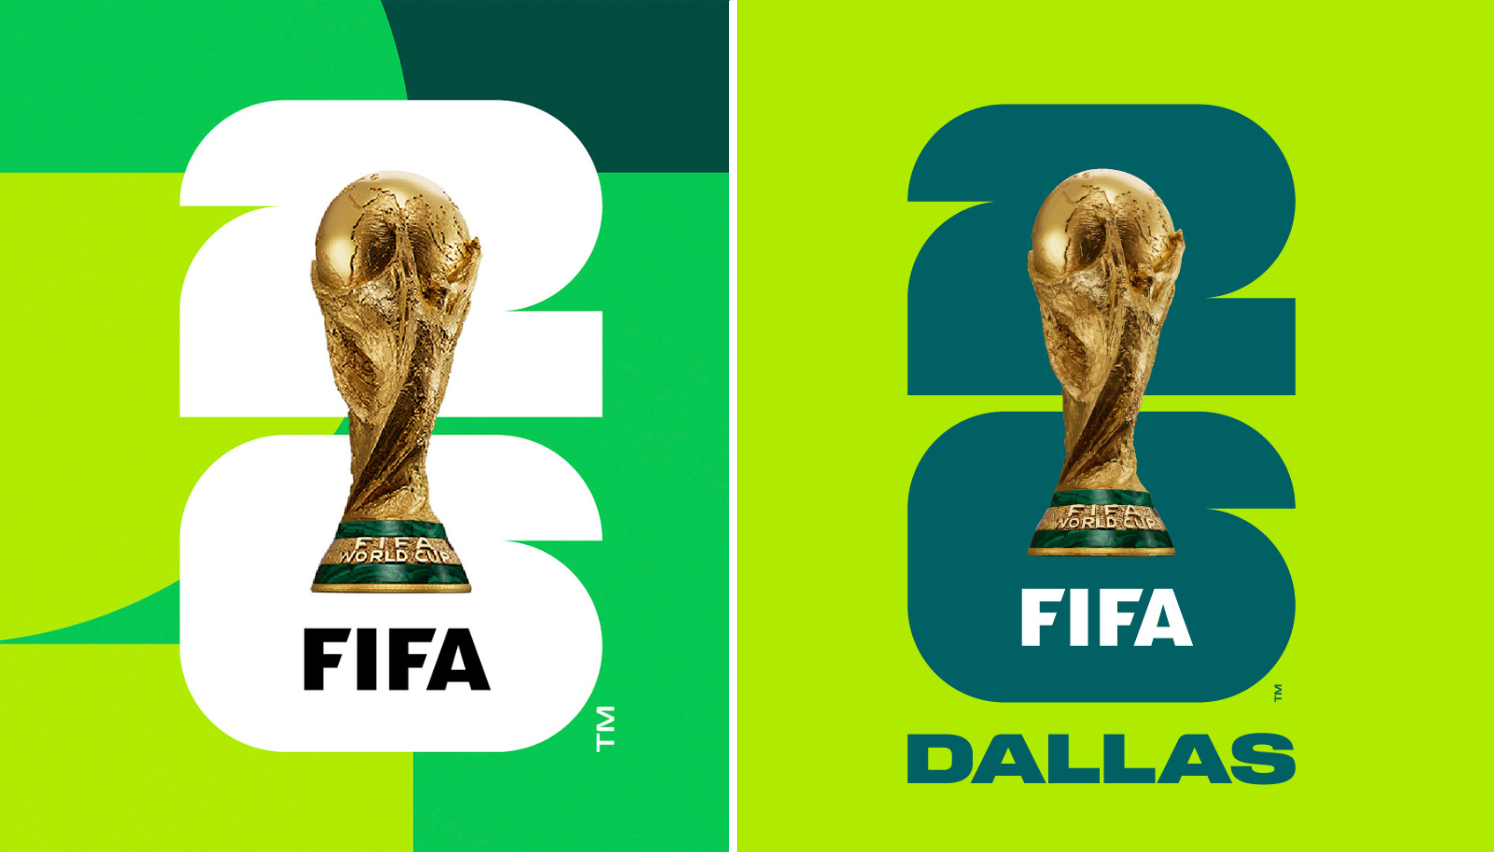 World Cup logo reveal garners fan reviews of 'highly disrespectful' to  'very millennial